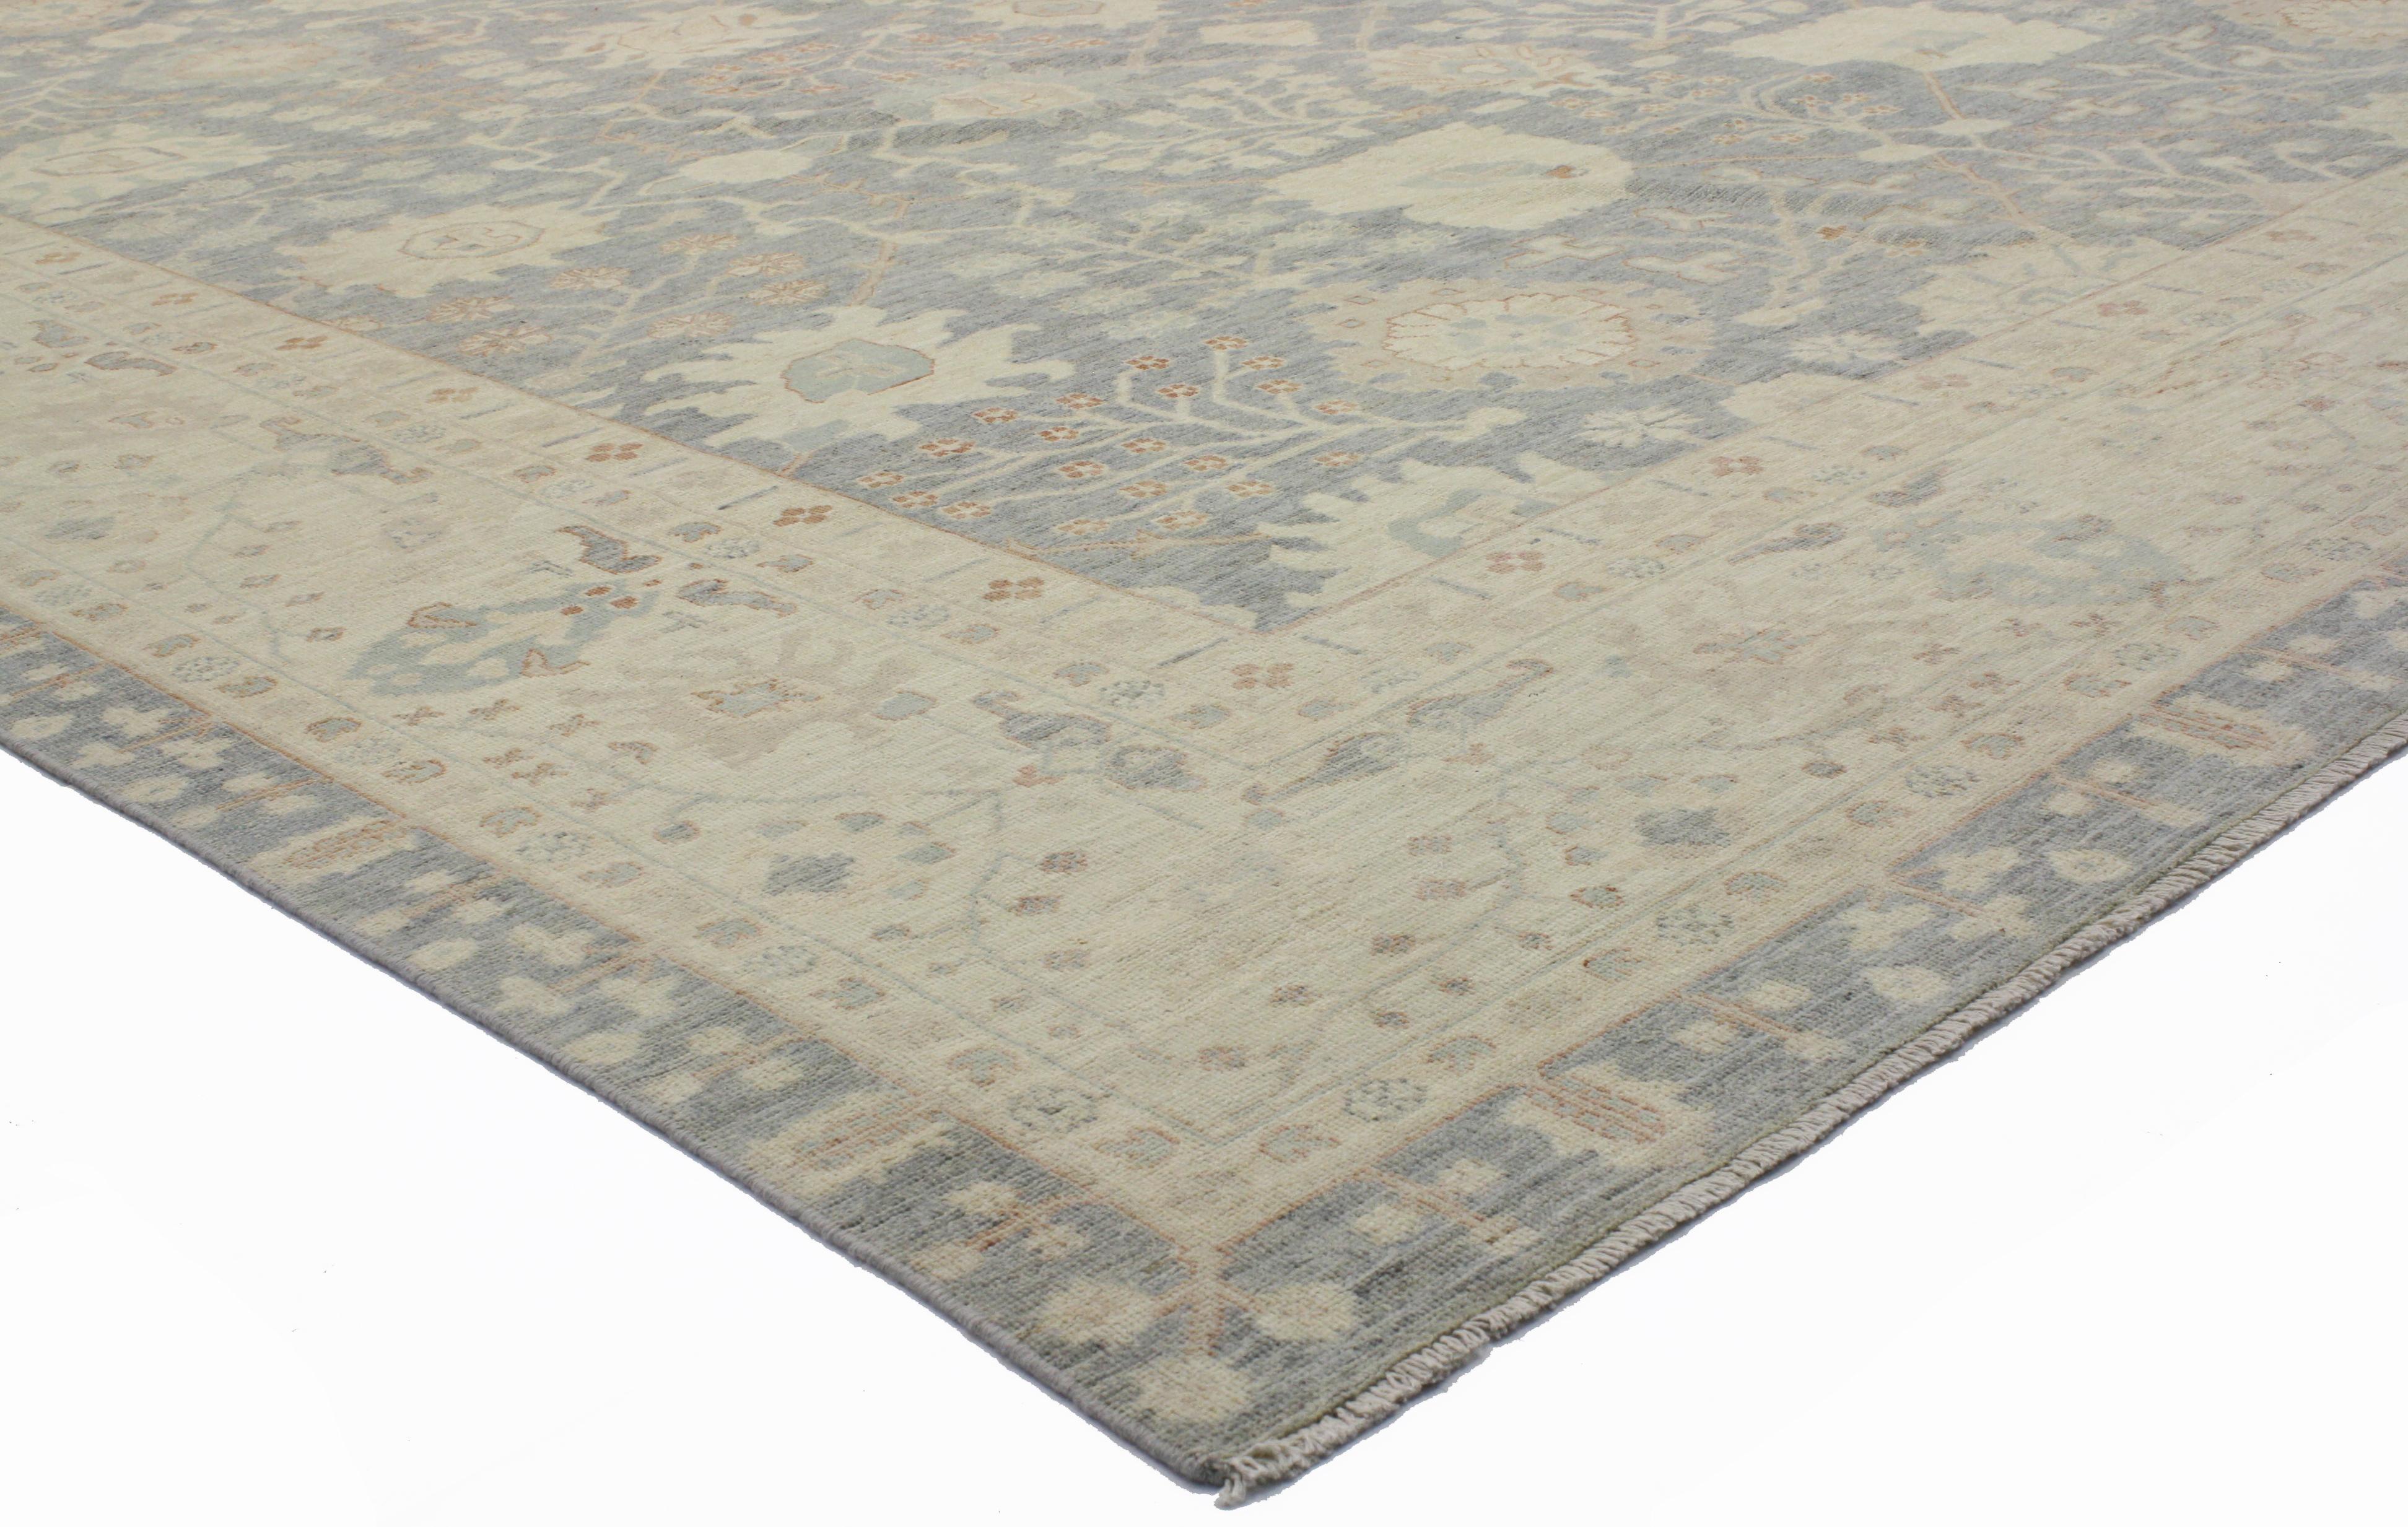 80216 New Contemporary Oushak palace size rug with neoclassic Transitional style 12'01 x 17'10. Representing a stylish union of traditional and modern, this new transitional Oushak style palace size rug with neoclassical style features a classic